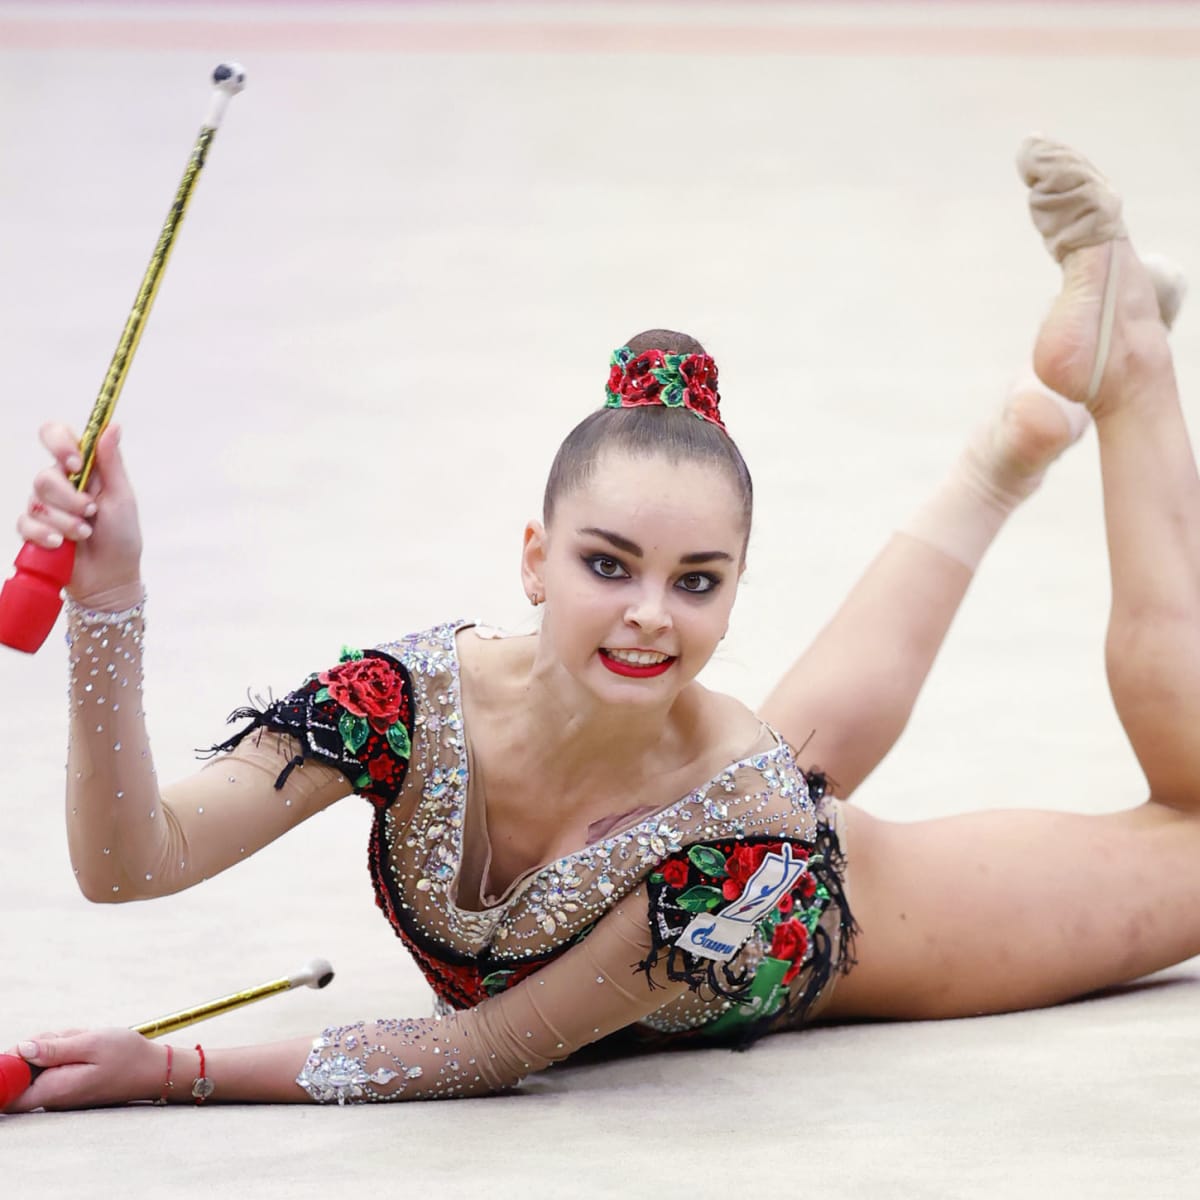 Rhythmic World Championships Live Stream Watch Online, TV Channel, Start Time - How to Watch and Stream Major League and College Sports